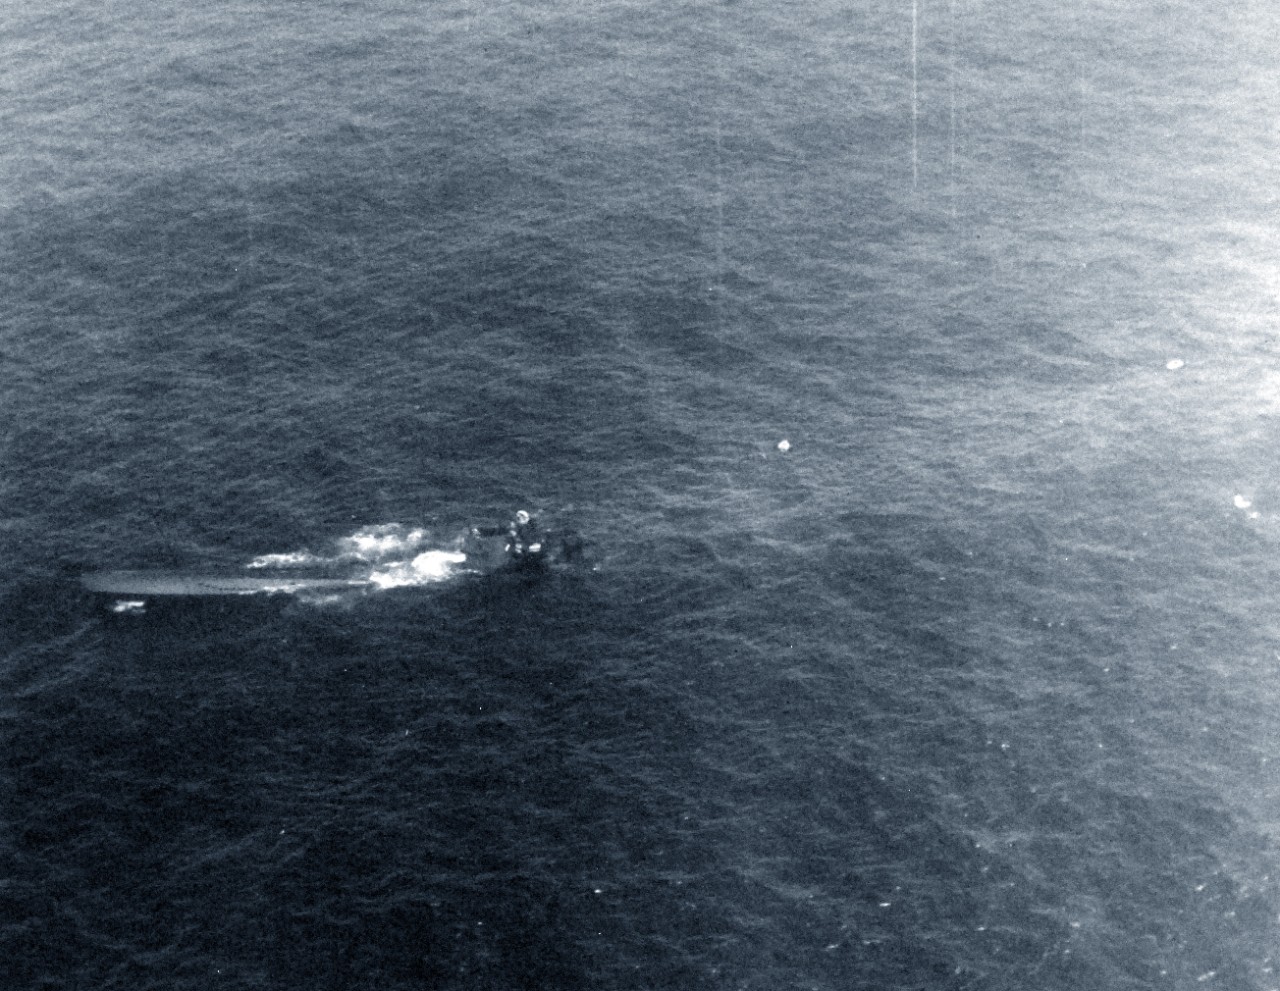 <p>80-G-79408: Air Attacks on German U-boats, WWII. German U-boat incident #3992, August 9, 1943. German submarine, U-664, sinking after an attack by Lieutenant Junior Grade G.G. Hogan, USNR. Forty-four survivors were picked up and taken on board USS Card (CVE-11). This view was taken by another aircraft during the attack.&nbsp;</p>
